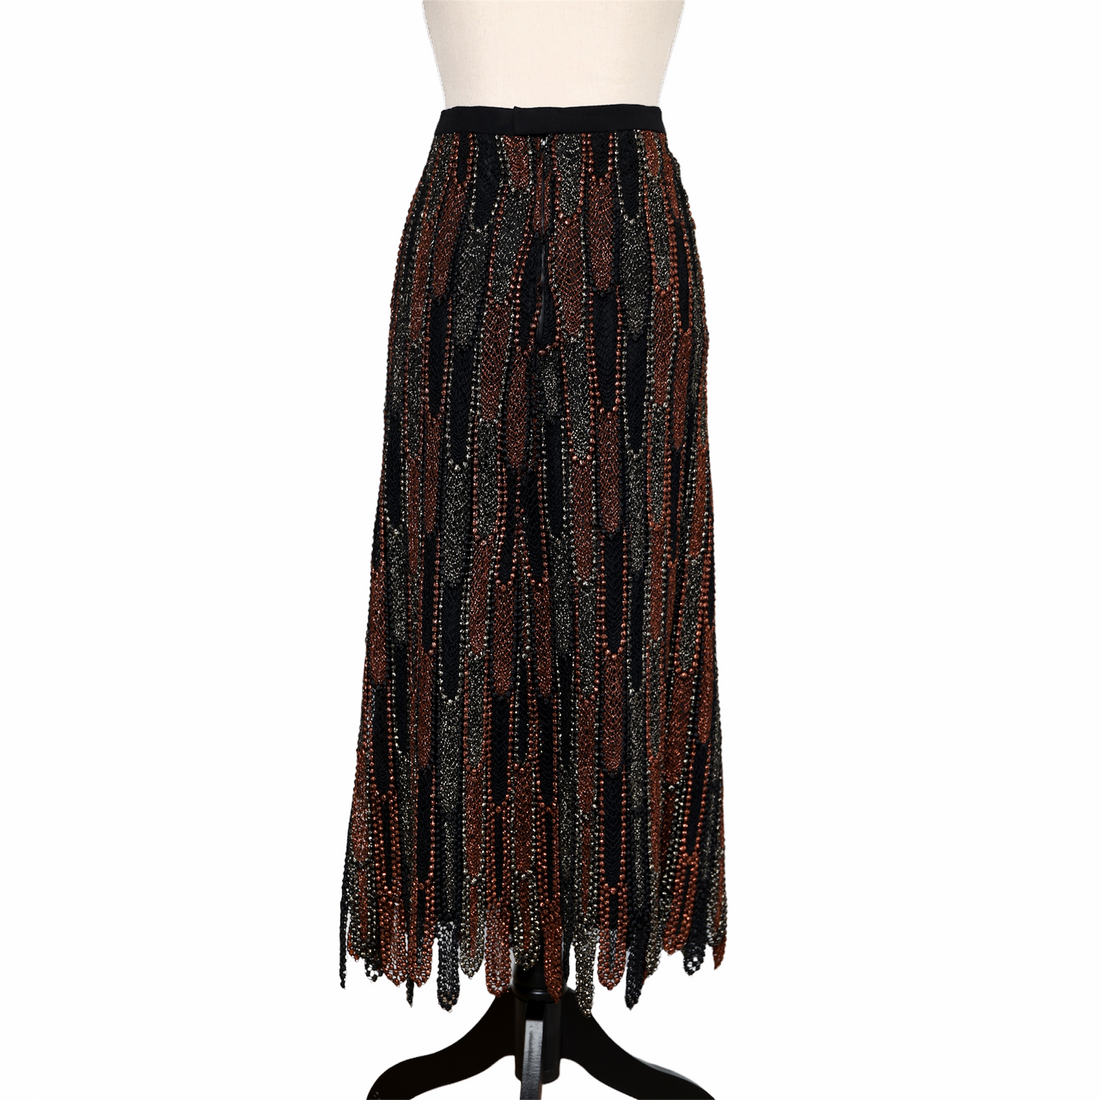 Elaborately embroidered tailored skirt in a flapper look